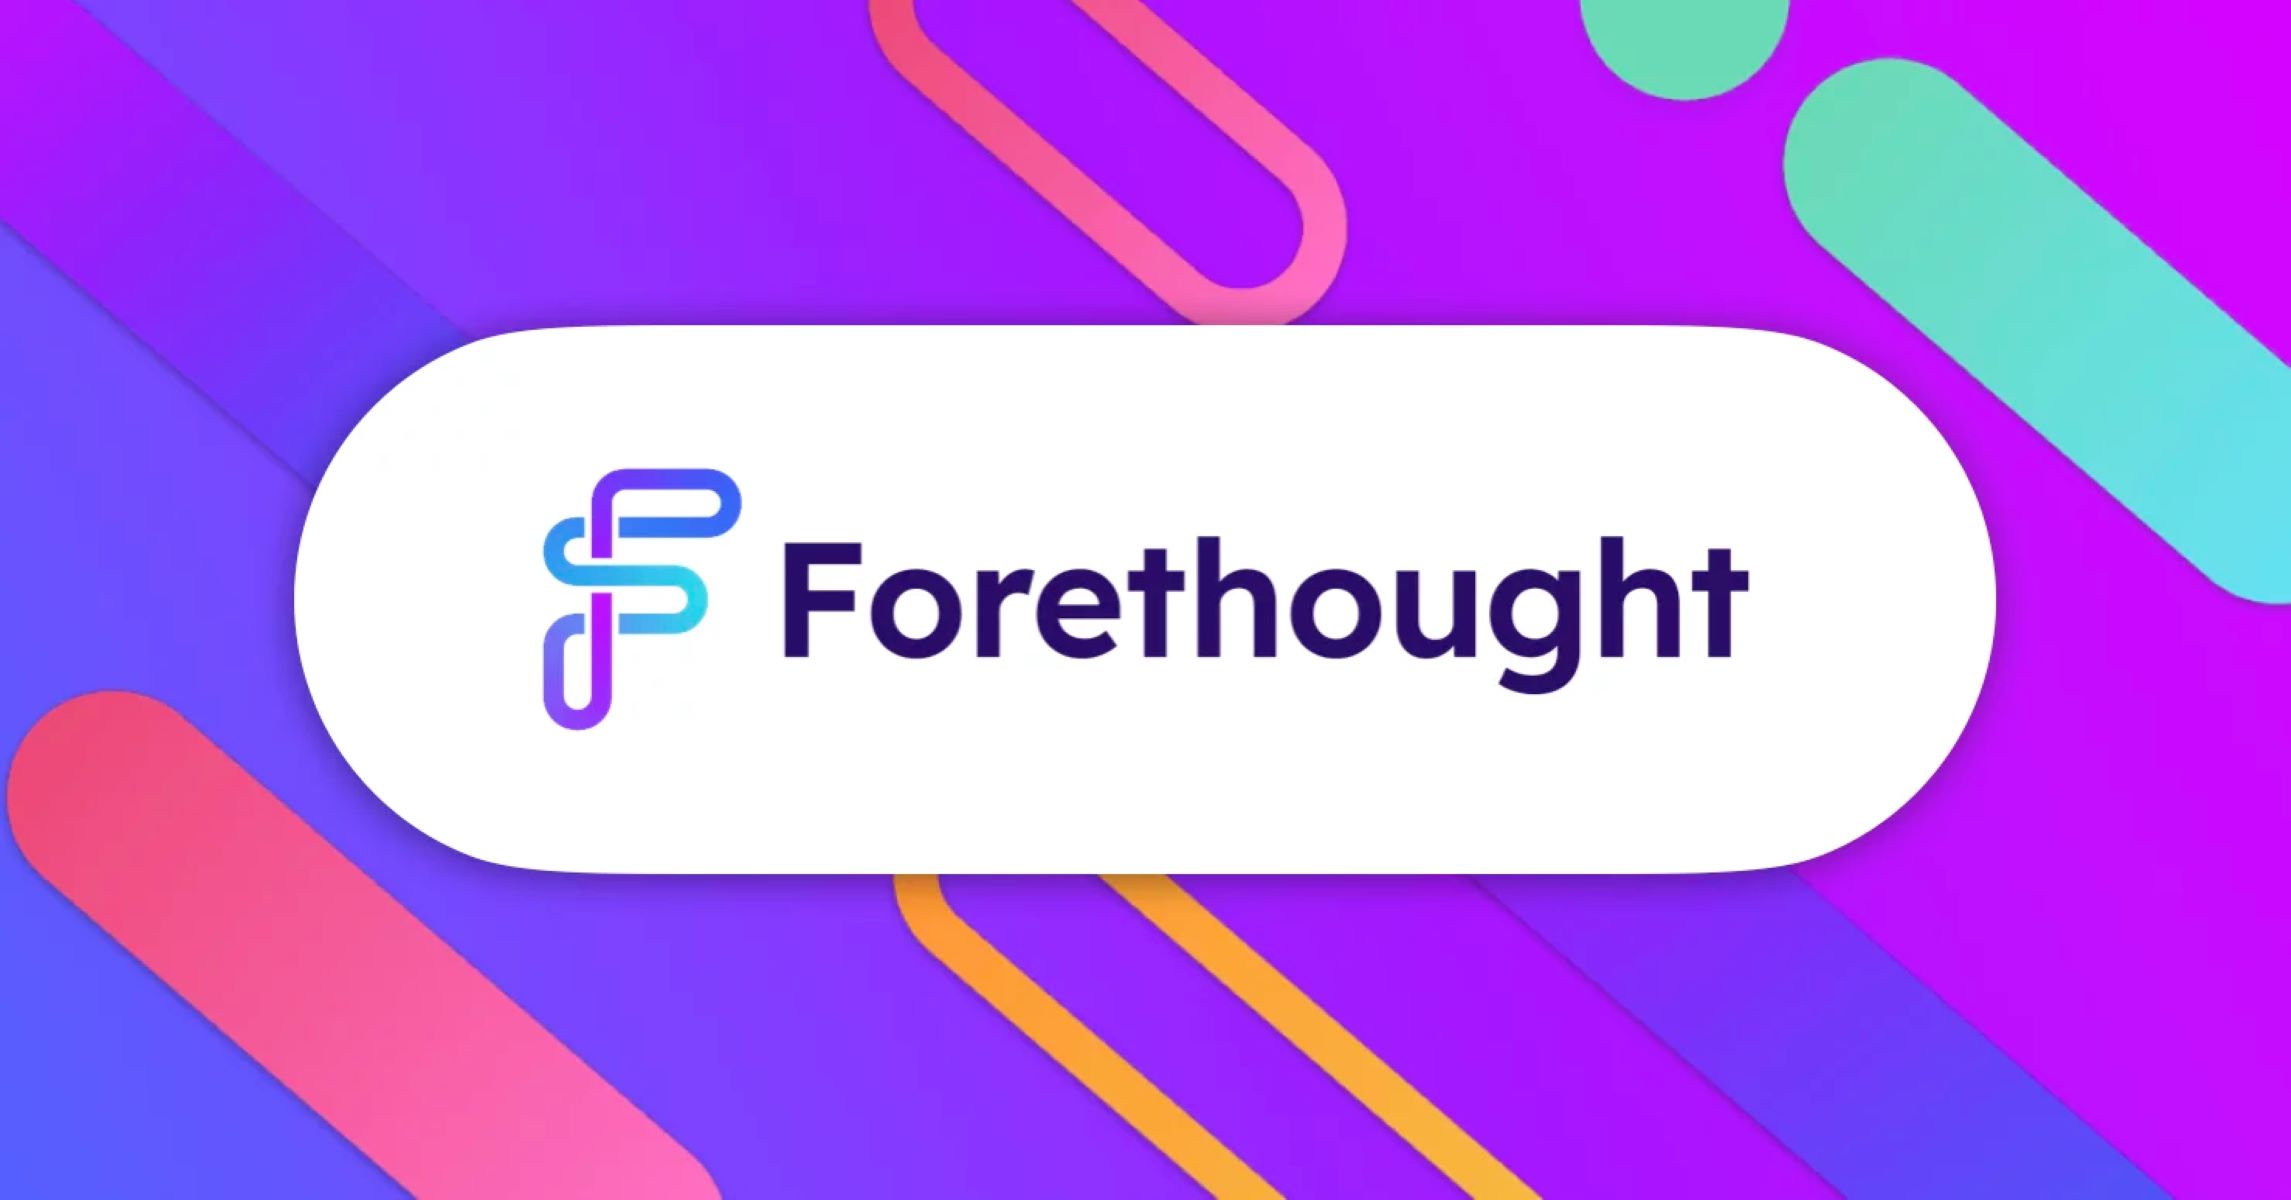 New Forethought Tool Revolutionizes Workflows With Natural Language